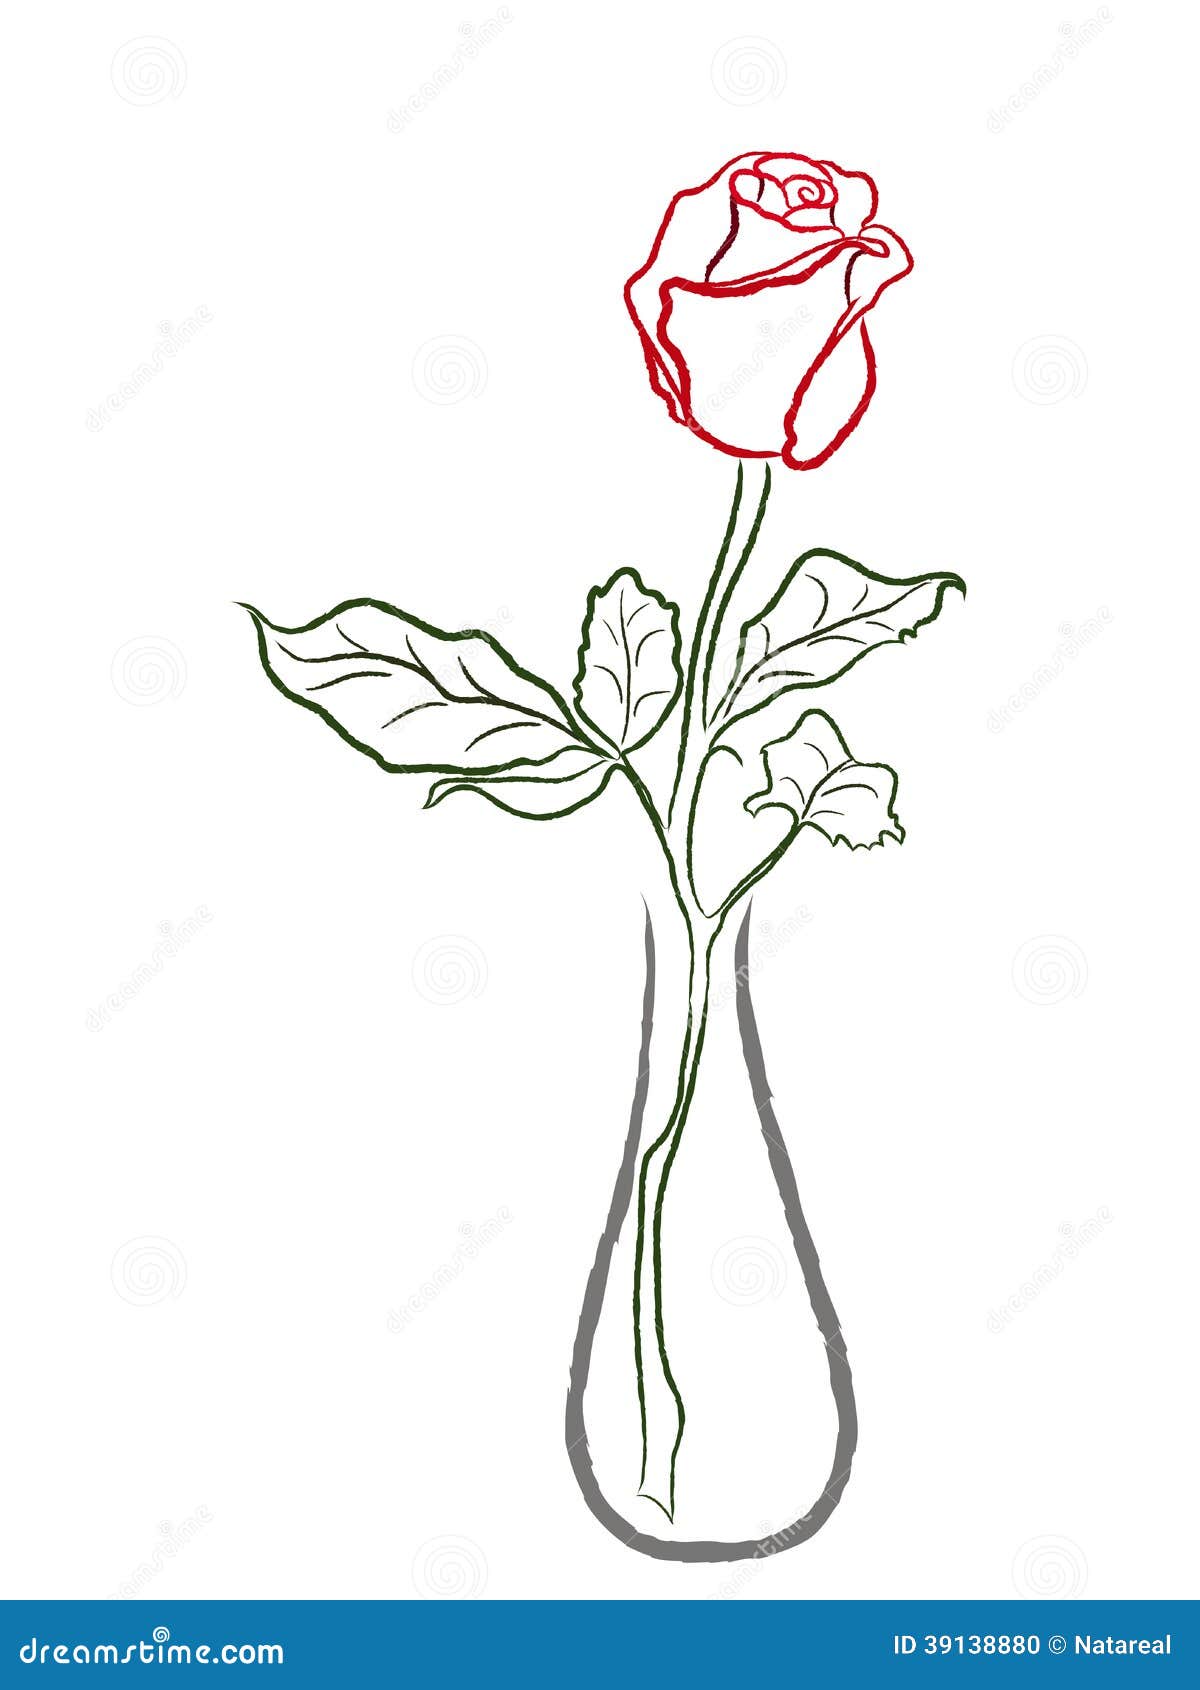 Stylized Red Rose In A Vase Isolated On White Background Hand Drawing